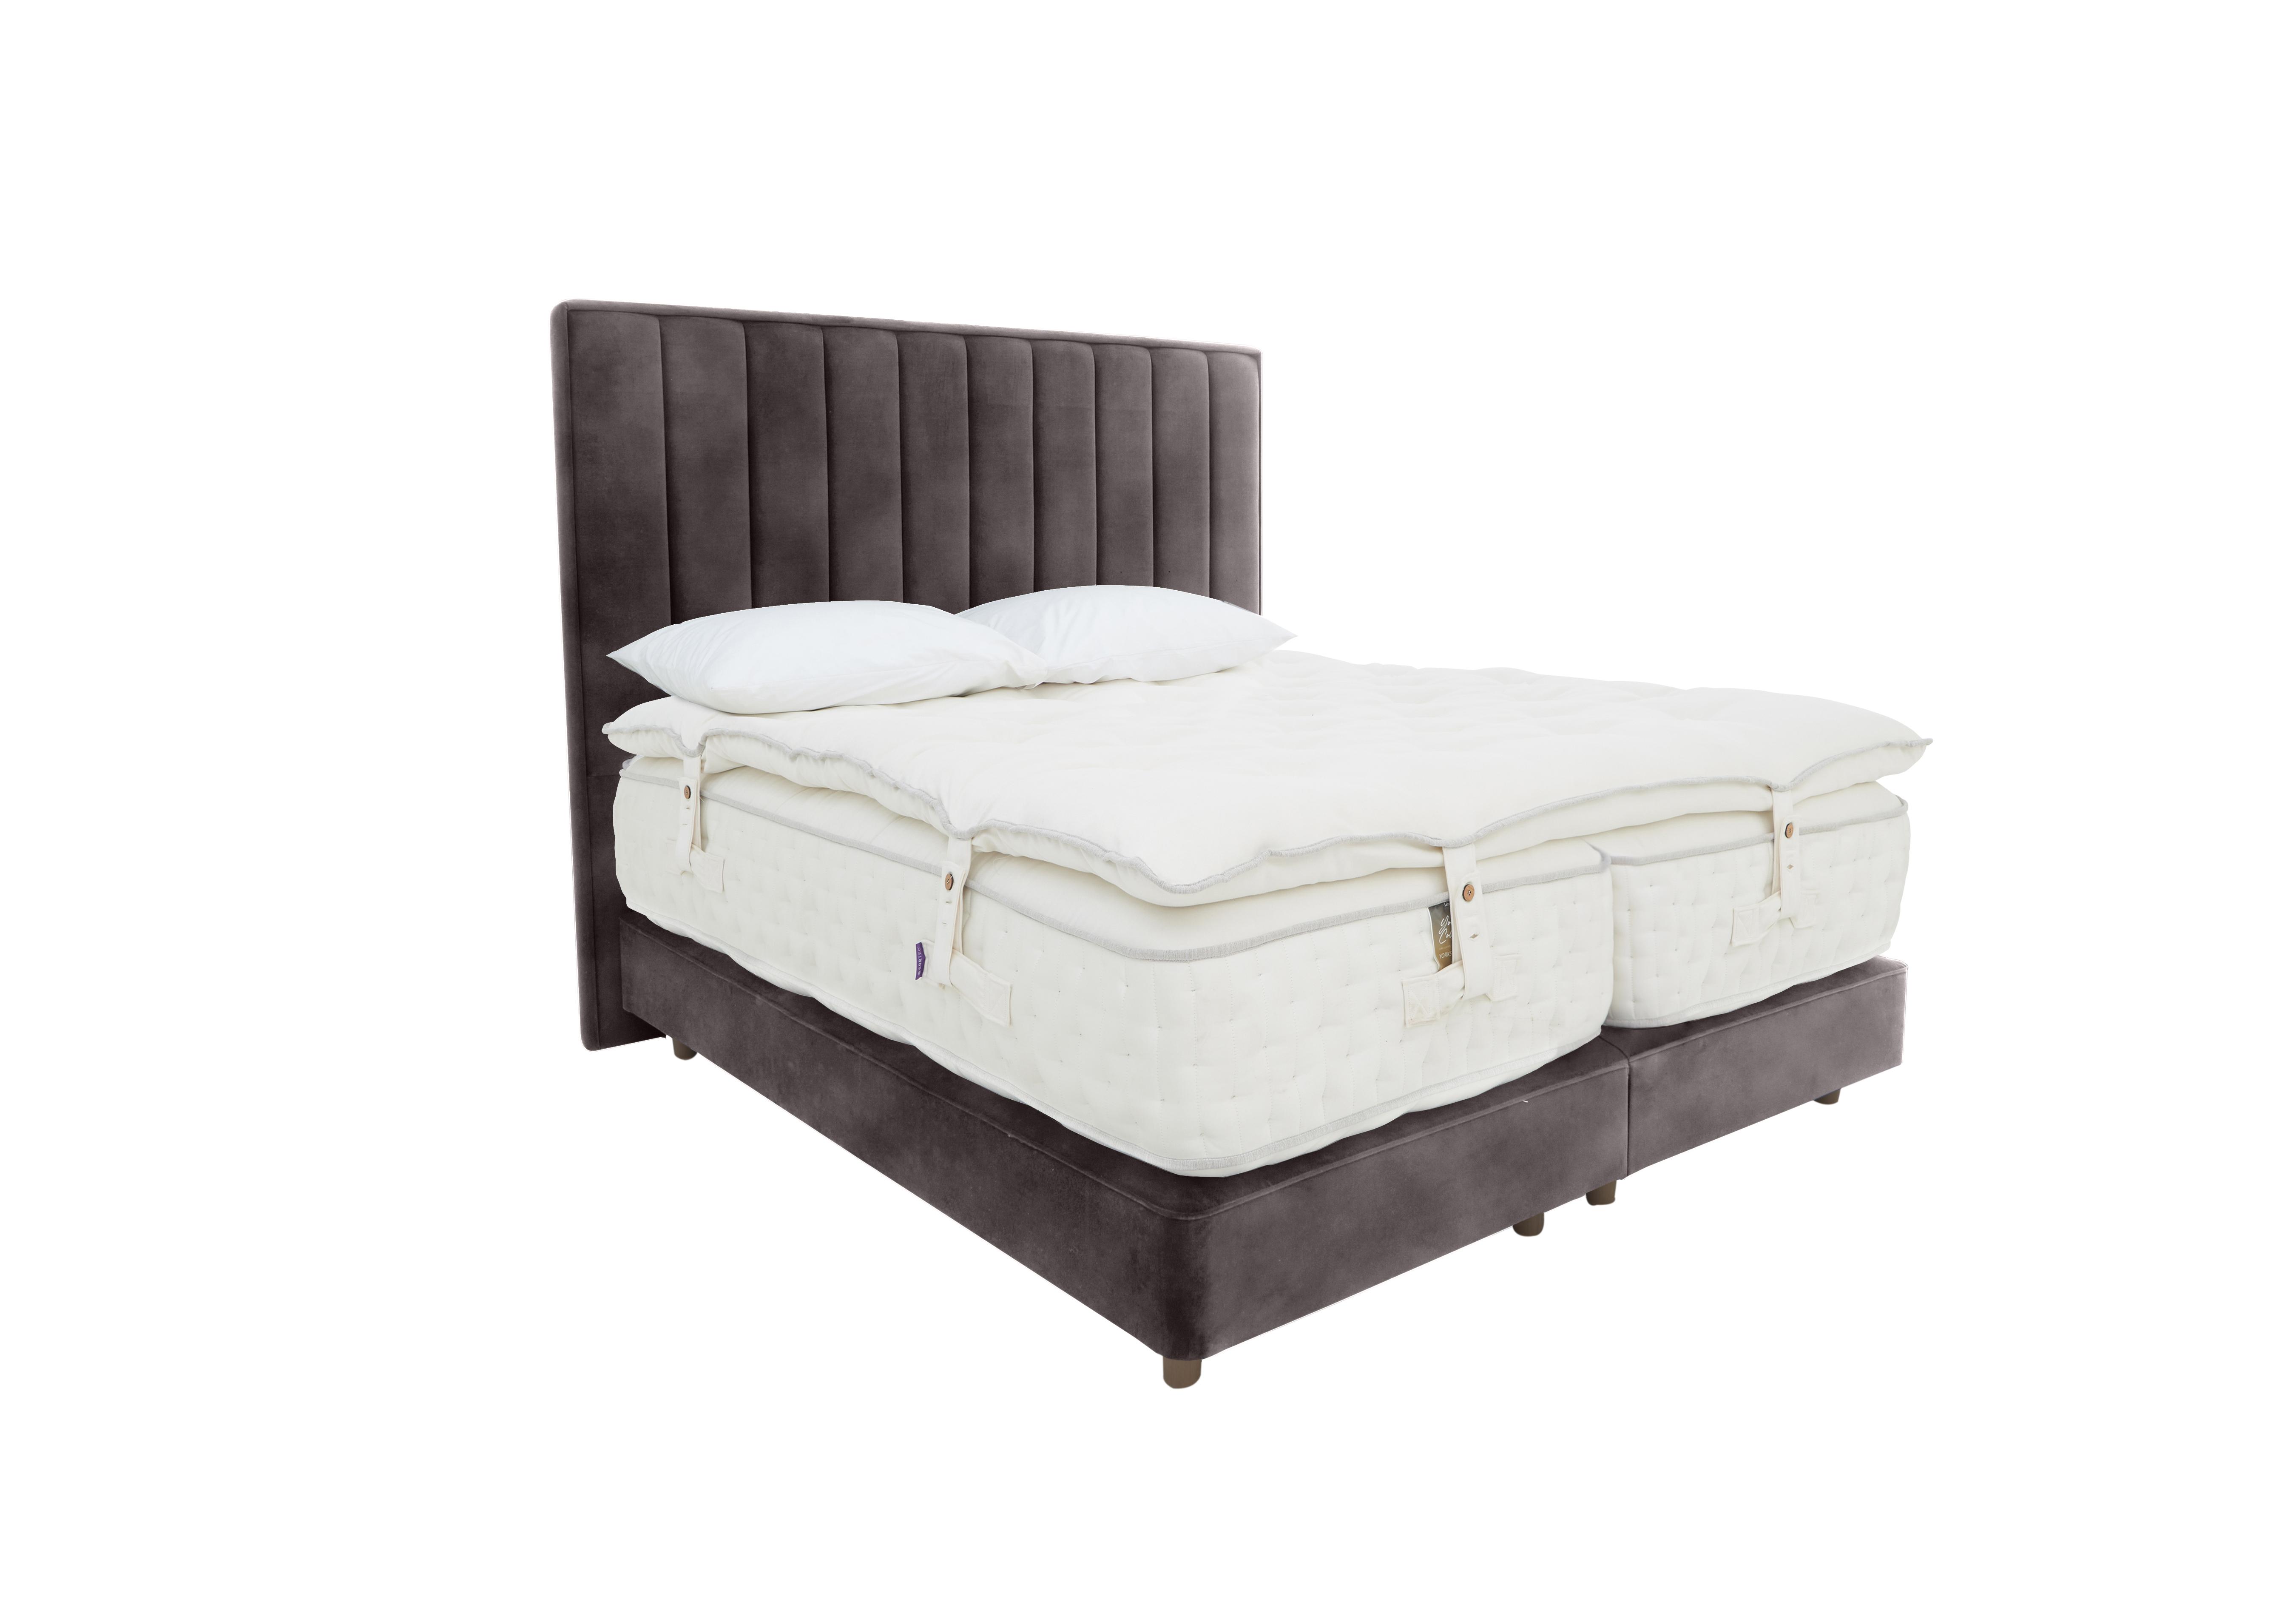 Yorkshire 40K Shallow Divan Set with Zip and Link Mattress with Mattress Topper in Lovely Asphalt on Furniture Village